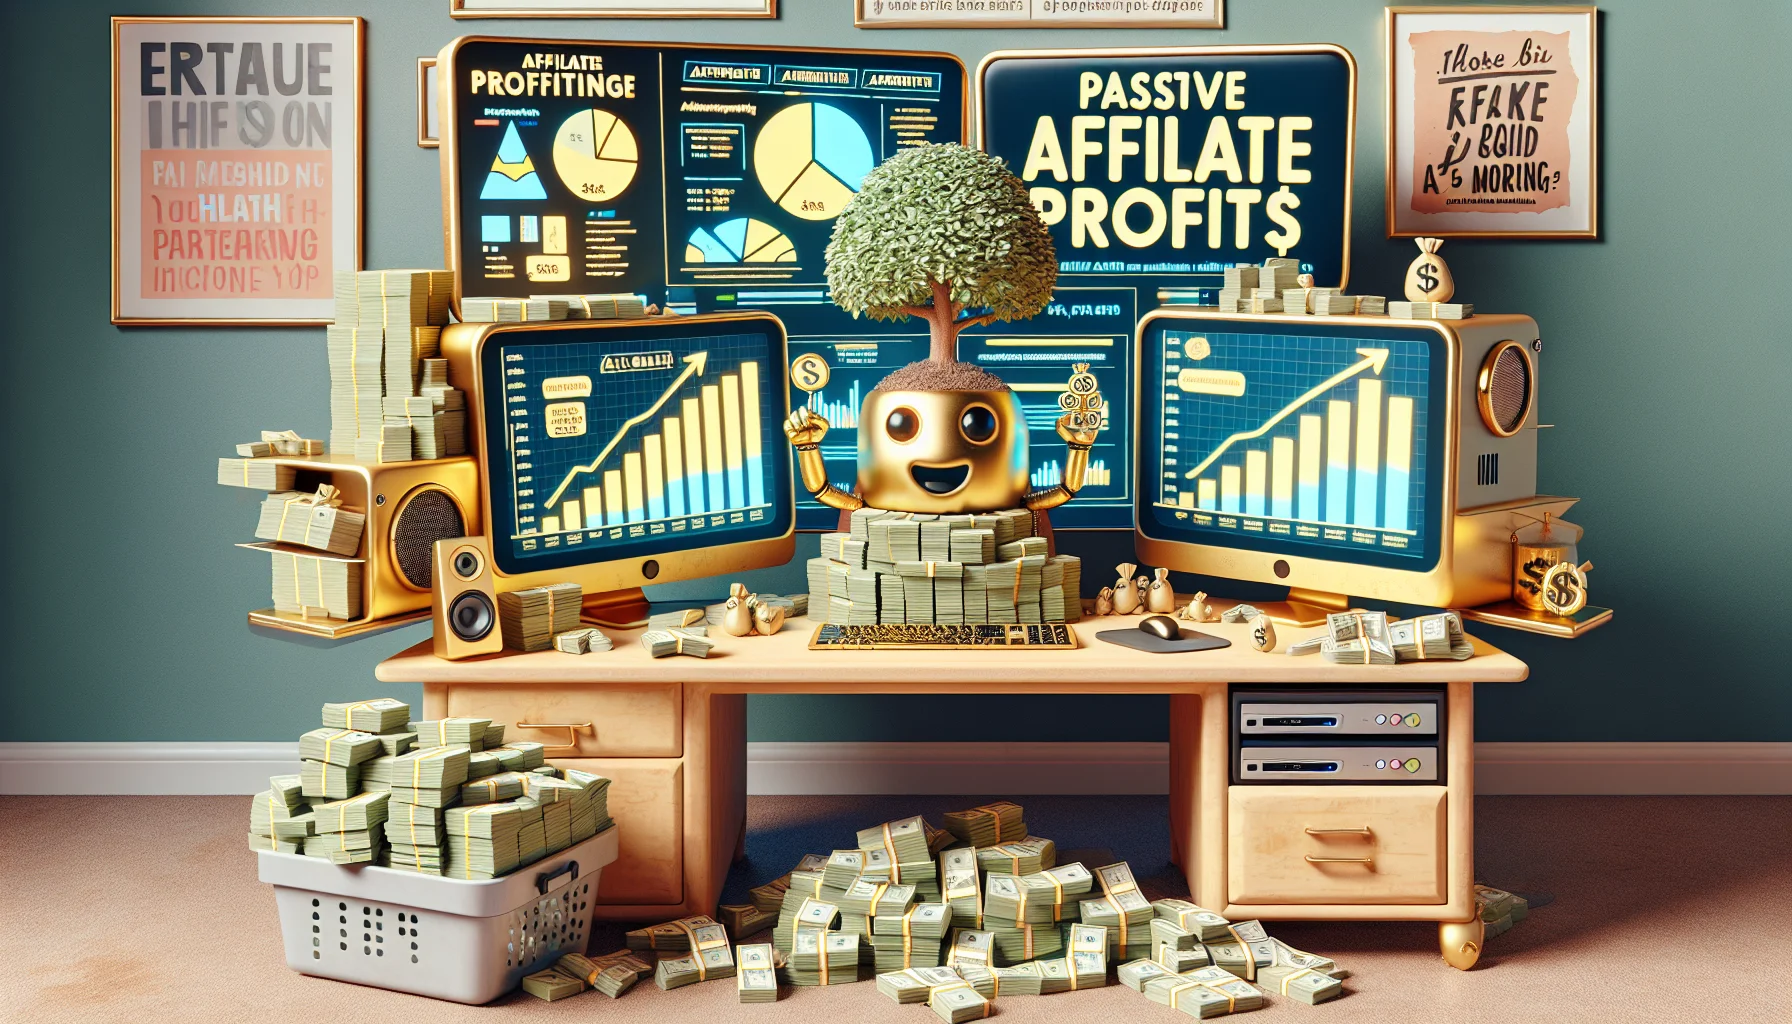 Illustrate an amusing and realistic scenario showcasing passive affiliate profits. Show a desktop with three computer monitors displaying various graphs and charts of increasing profitability, with the text 'Affiliate Marketing' on one of the screens. On the desk, depict a gold-plated keyboard and mouse alongside a big stack of money; have a tree growing out of the pile of cash, symbolizing growth and prosperity. The room in which the desk is situated has posters on the walls displaying motivational quotes about success and money. A small robot, with a friendly smile, is seen diligently working on the computer, symbolizing automation and passive income.